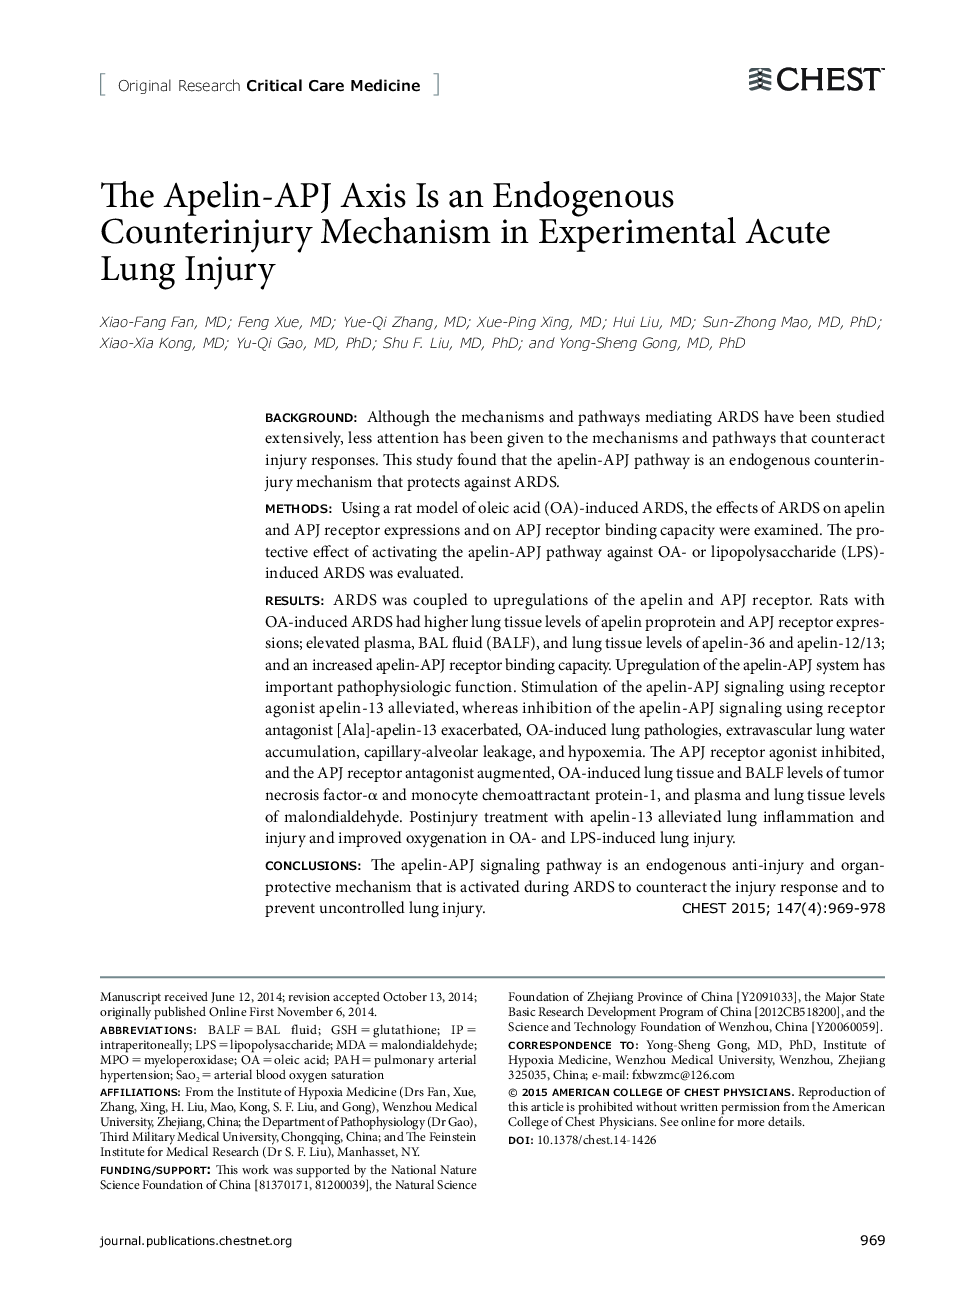 The Apelin-APJ Axis Is an Endogenous Counterinjury Mechanism in Experimental Acute Lung Injury 